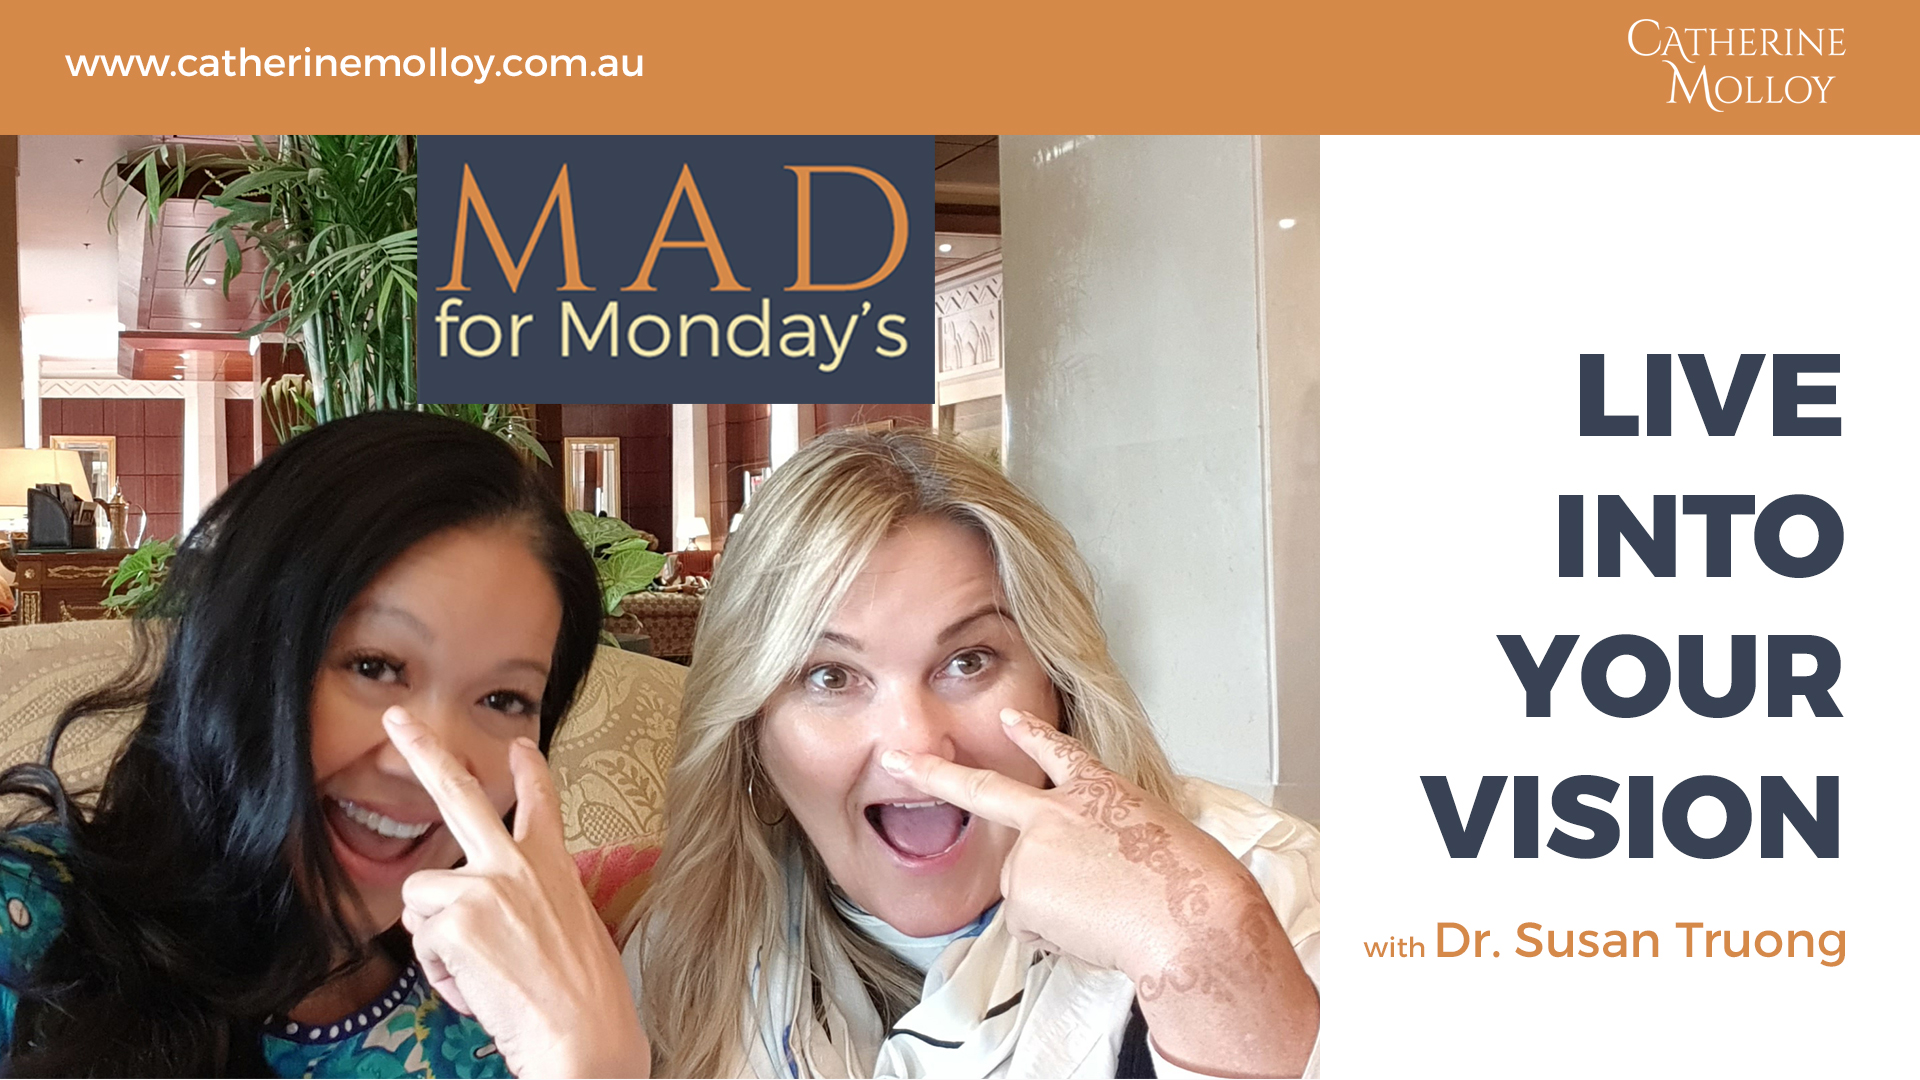 MAD for Monday’s – Live Into Your Vision